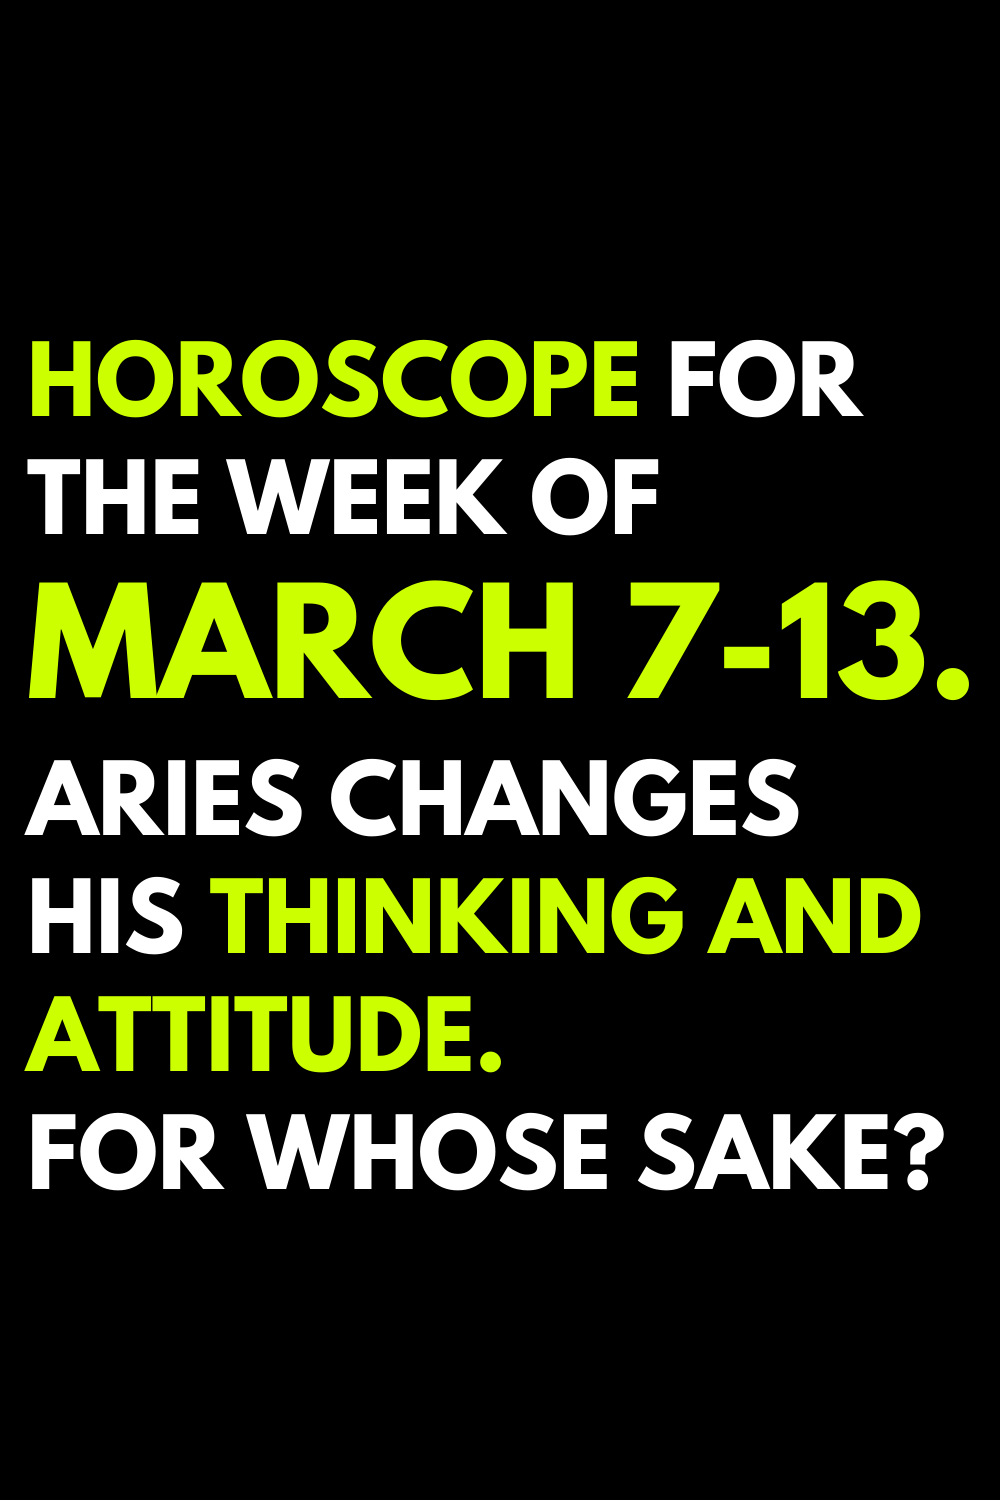 Horoscope for the week of March 7-13. Aries changes his thinking and attitude. For whose sake?